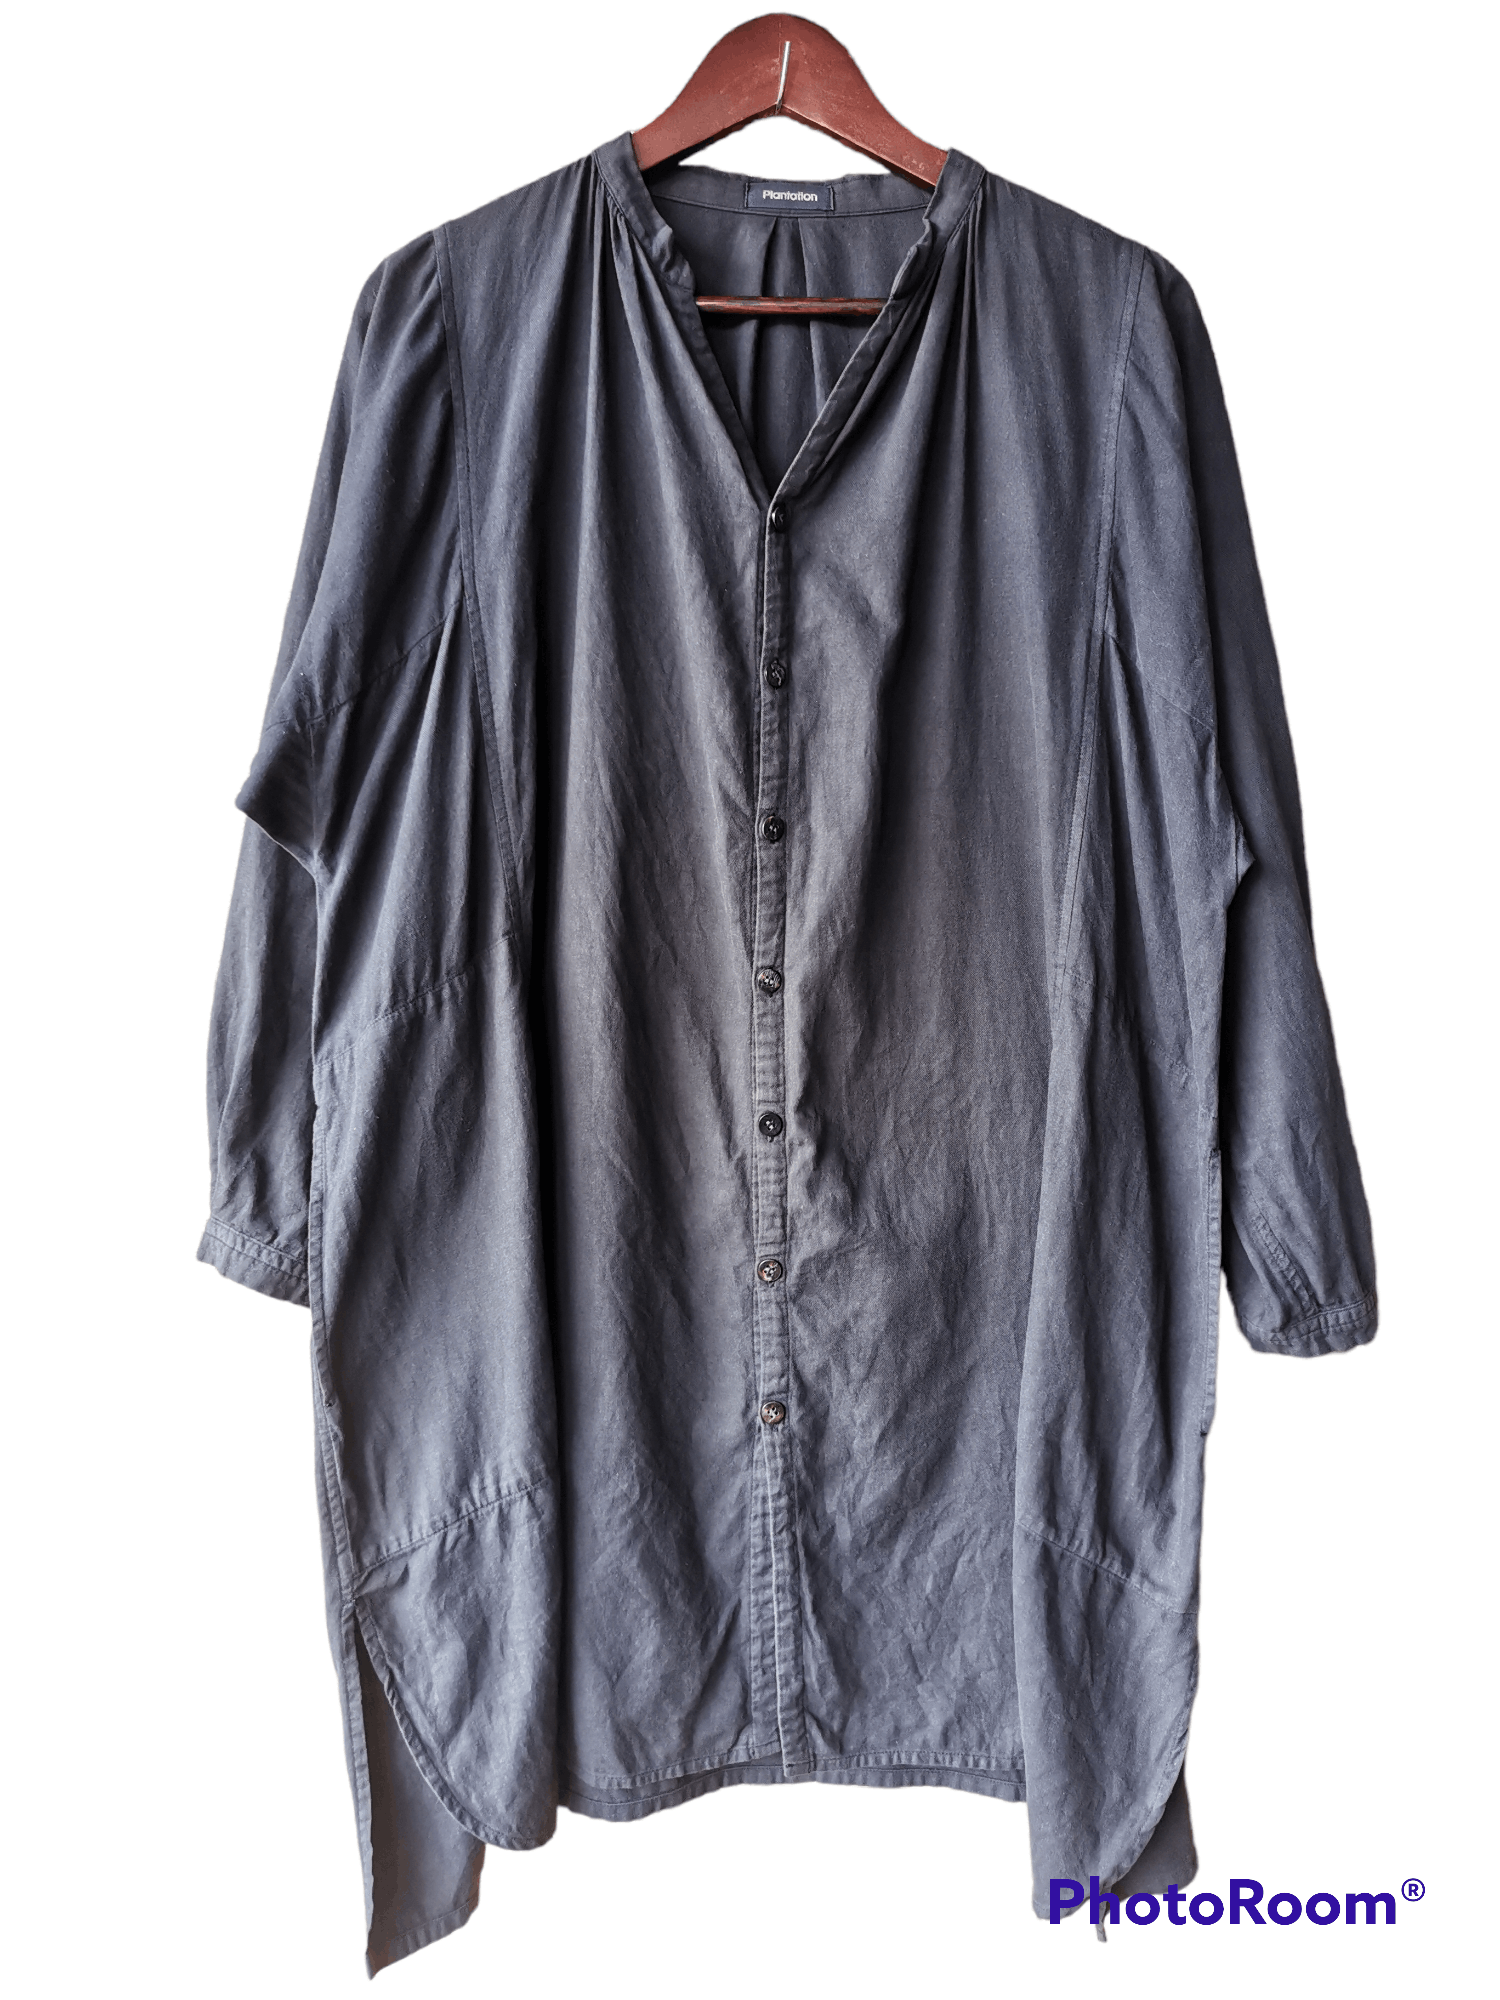 Issey Miyake Plantation by Issey Miyake Buttons Up Dress Size XS / US 0-2 / IT 36-38 - 1 Preview